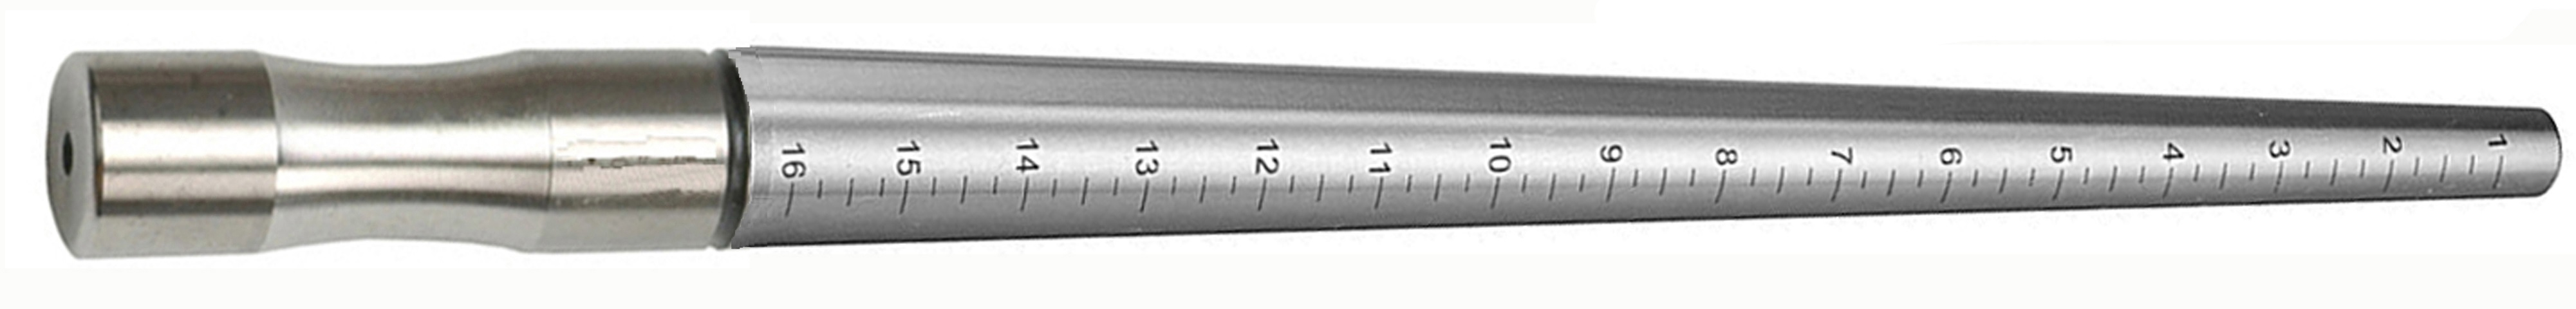 STAINLESS STEEL RING MANDREL, hard chromed , ungrooved, marked 1-16 - Click Image to Close